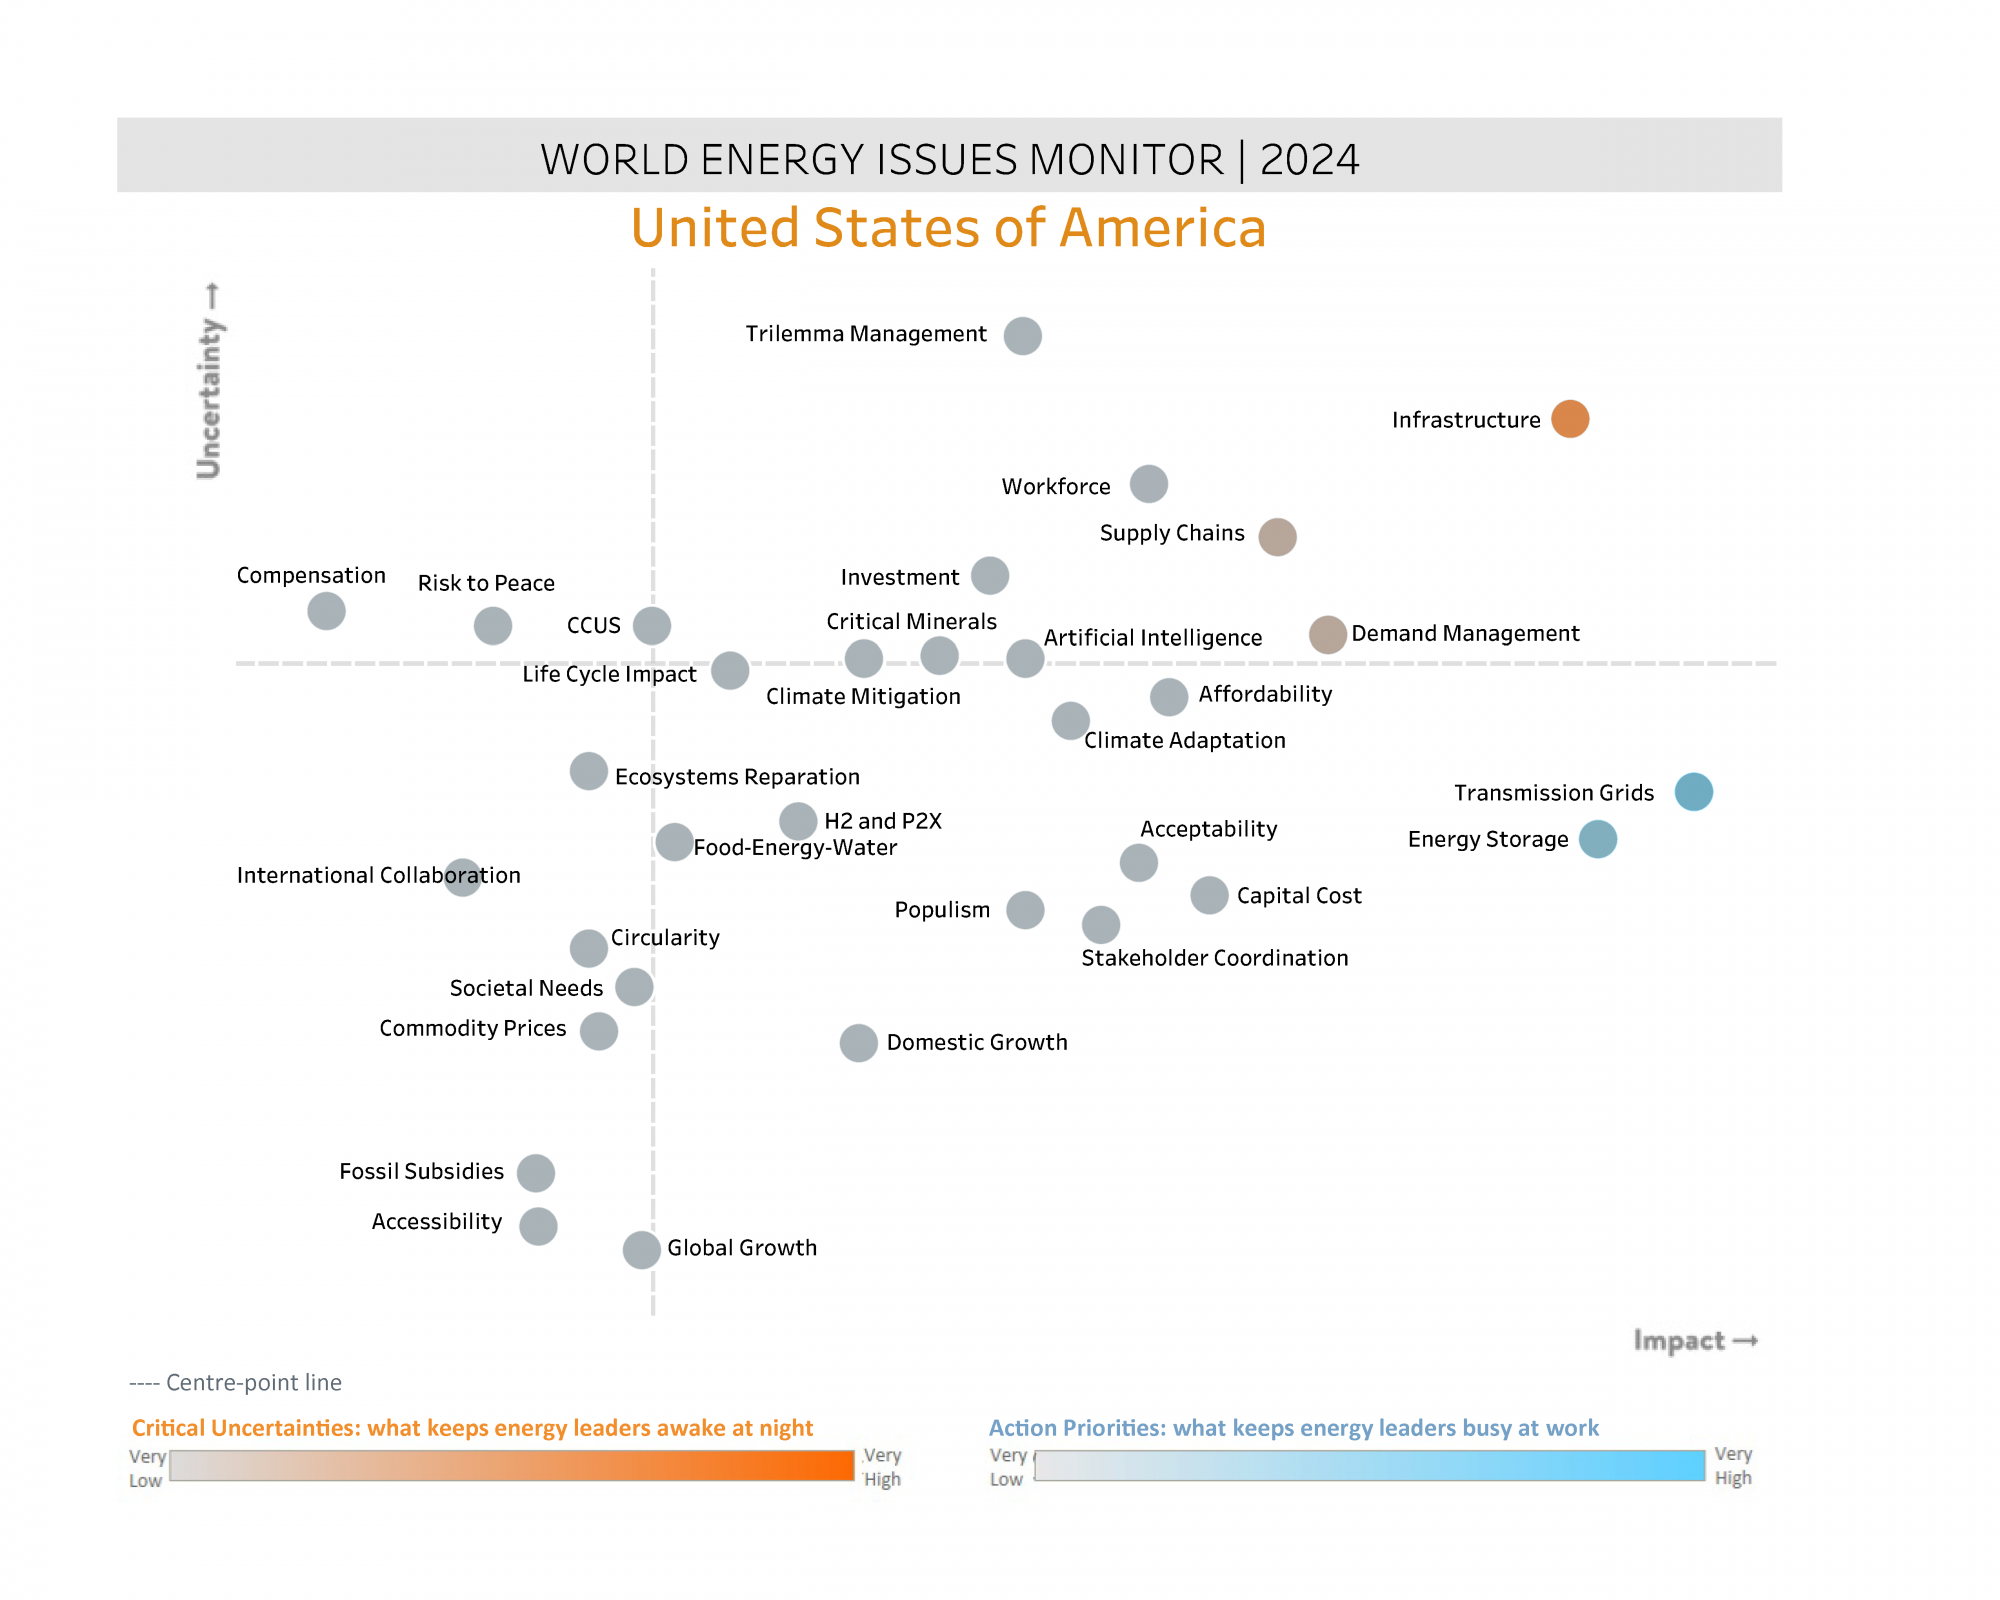 Unites States Energy Issues, critical uncertainties, action priorities